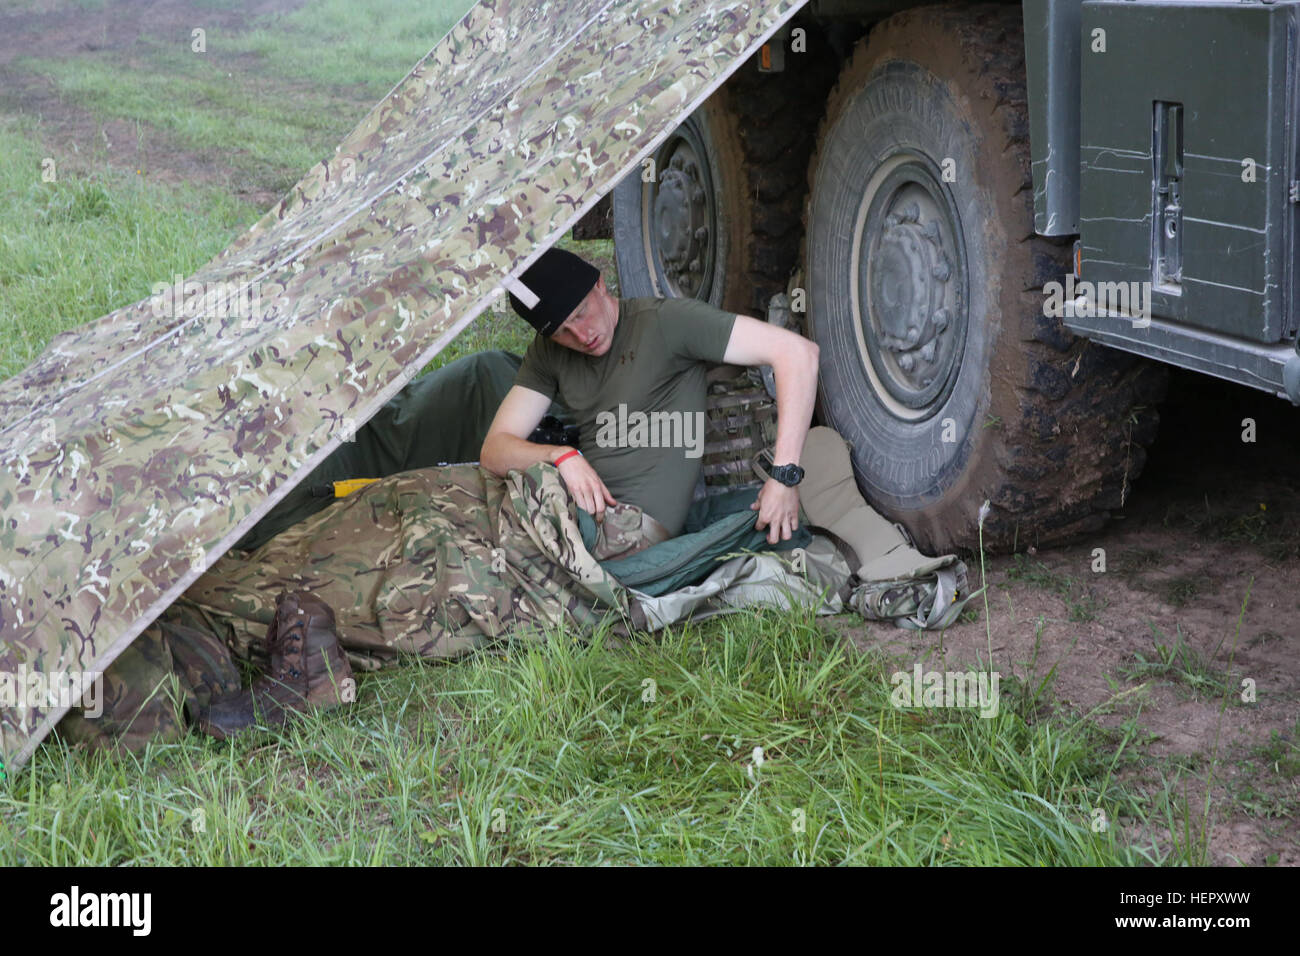 A British soldier of Airborne Combined Joint Expeditionary Force prepares to get some shut eye while conducting tactical operations during Swift Response 16 training exercise at the Hohenfels Training Area, a part of the Joint Multinational Readiness Center, in Hohenfels, Germany, Jun. 23, 2016. Exercise Swift Response is one of the premier military crisis response training events for multi-national airborne forces in the world. The exercise is designed to enhance the readiness of the combat core of the U.S. Global Response Force – currently the 82nd Airborne Division’s 1st Brigade Combat Team Stock Photo